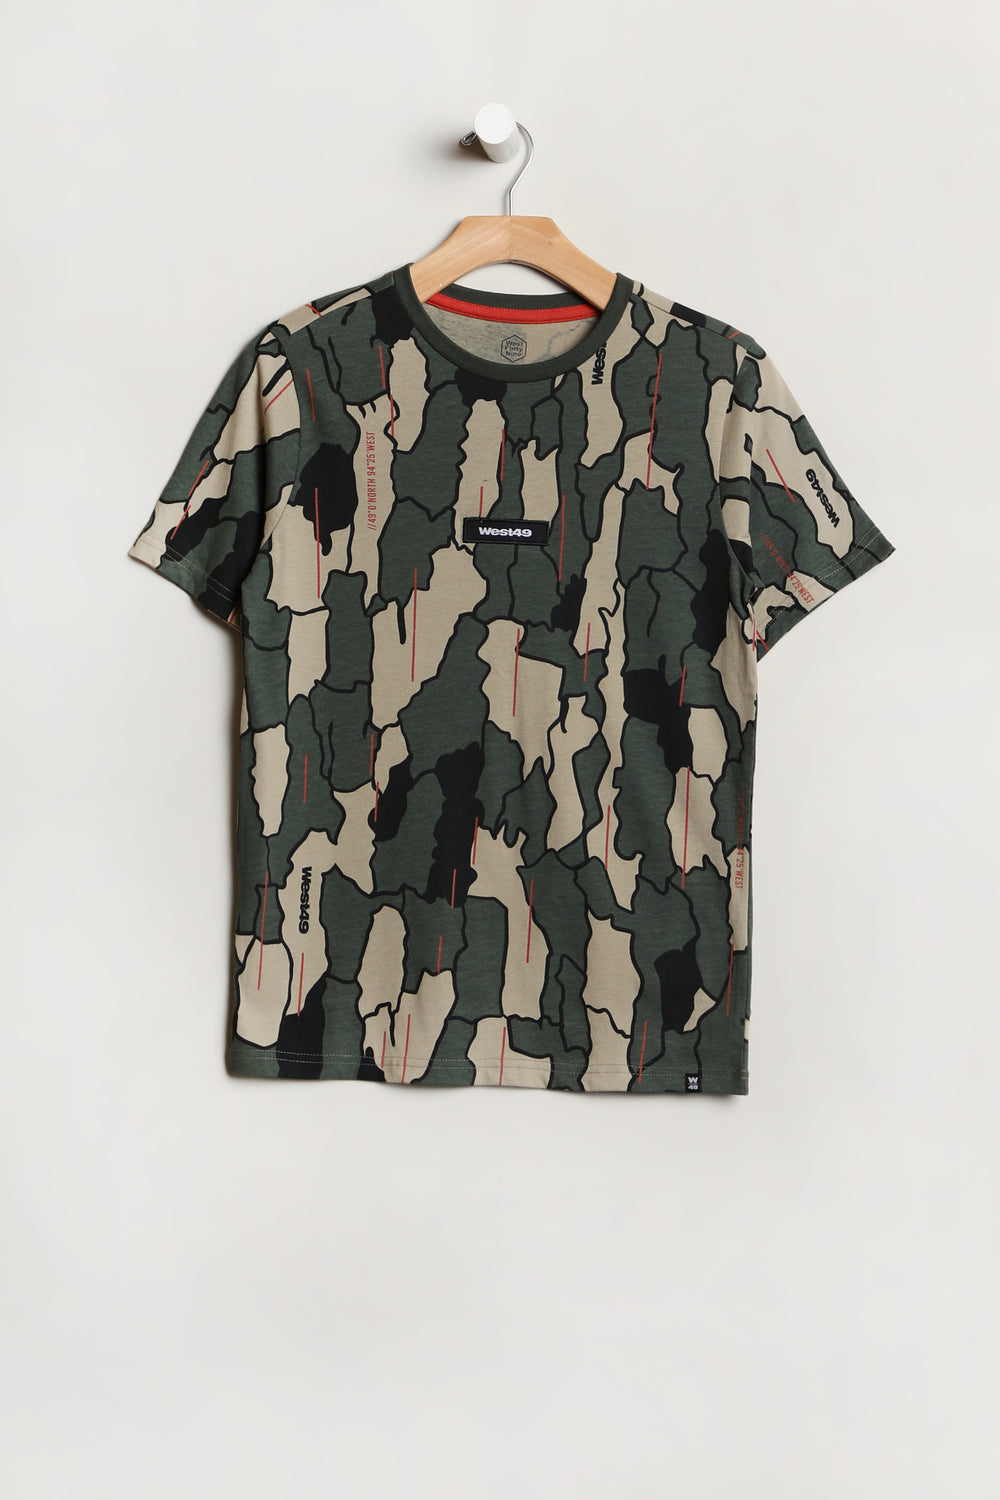 West49 Youth Allover Camo Print T-Shirt West49 Youth Allover Camo Print T-Shirt